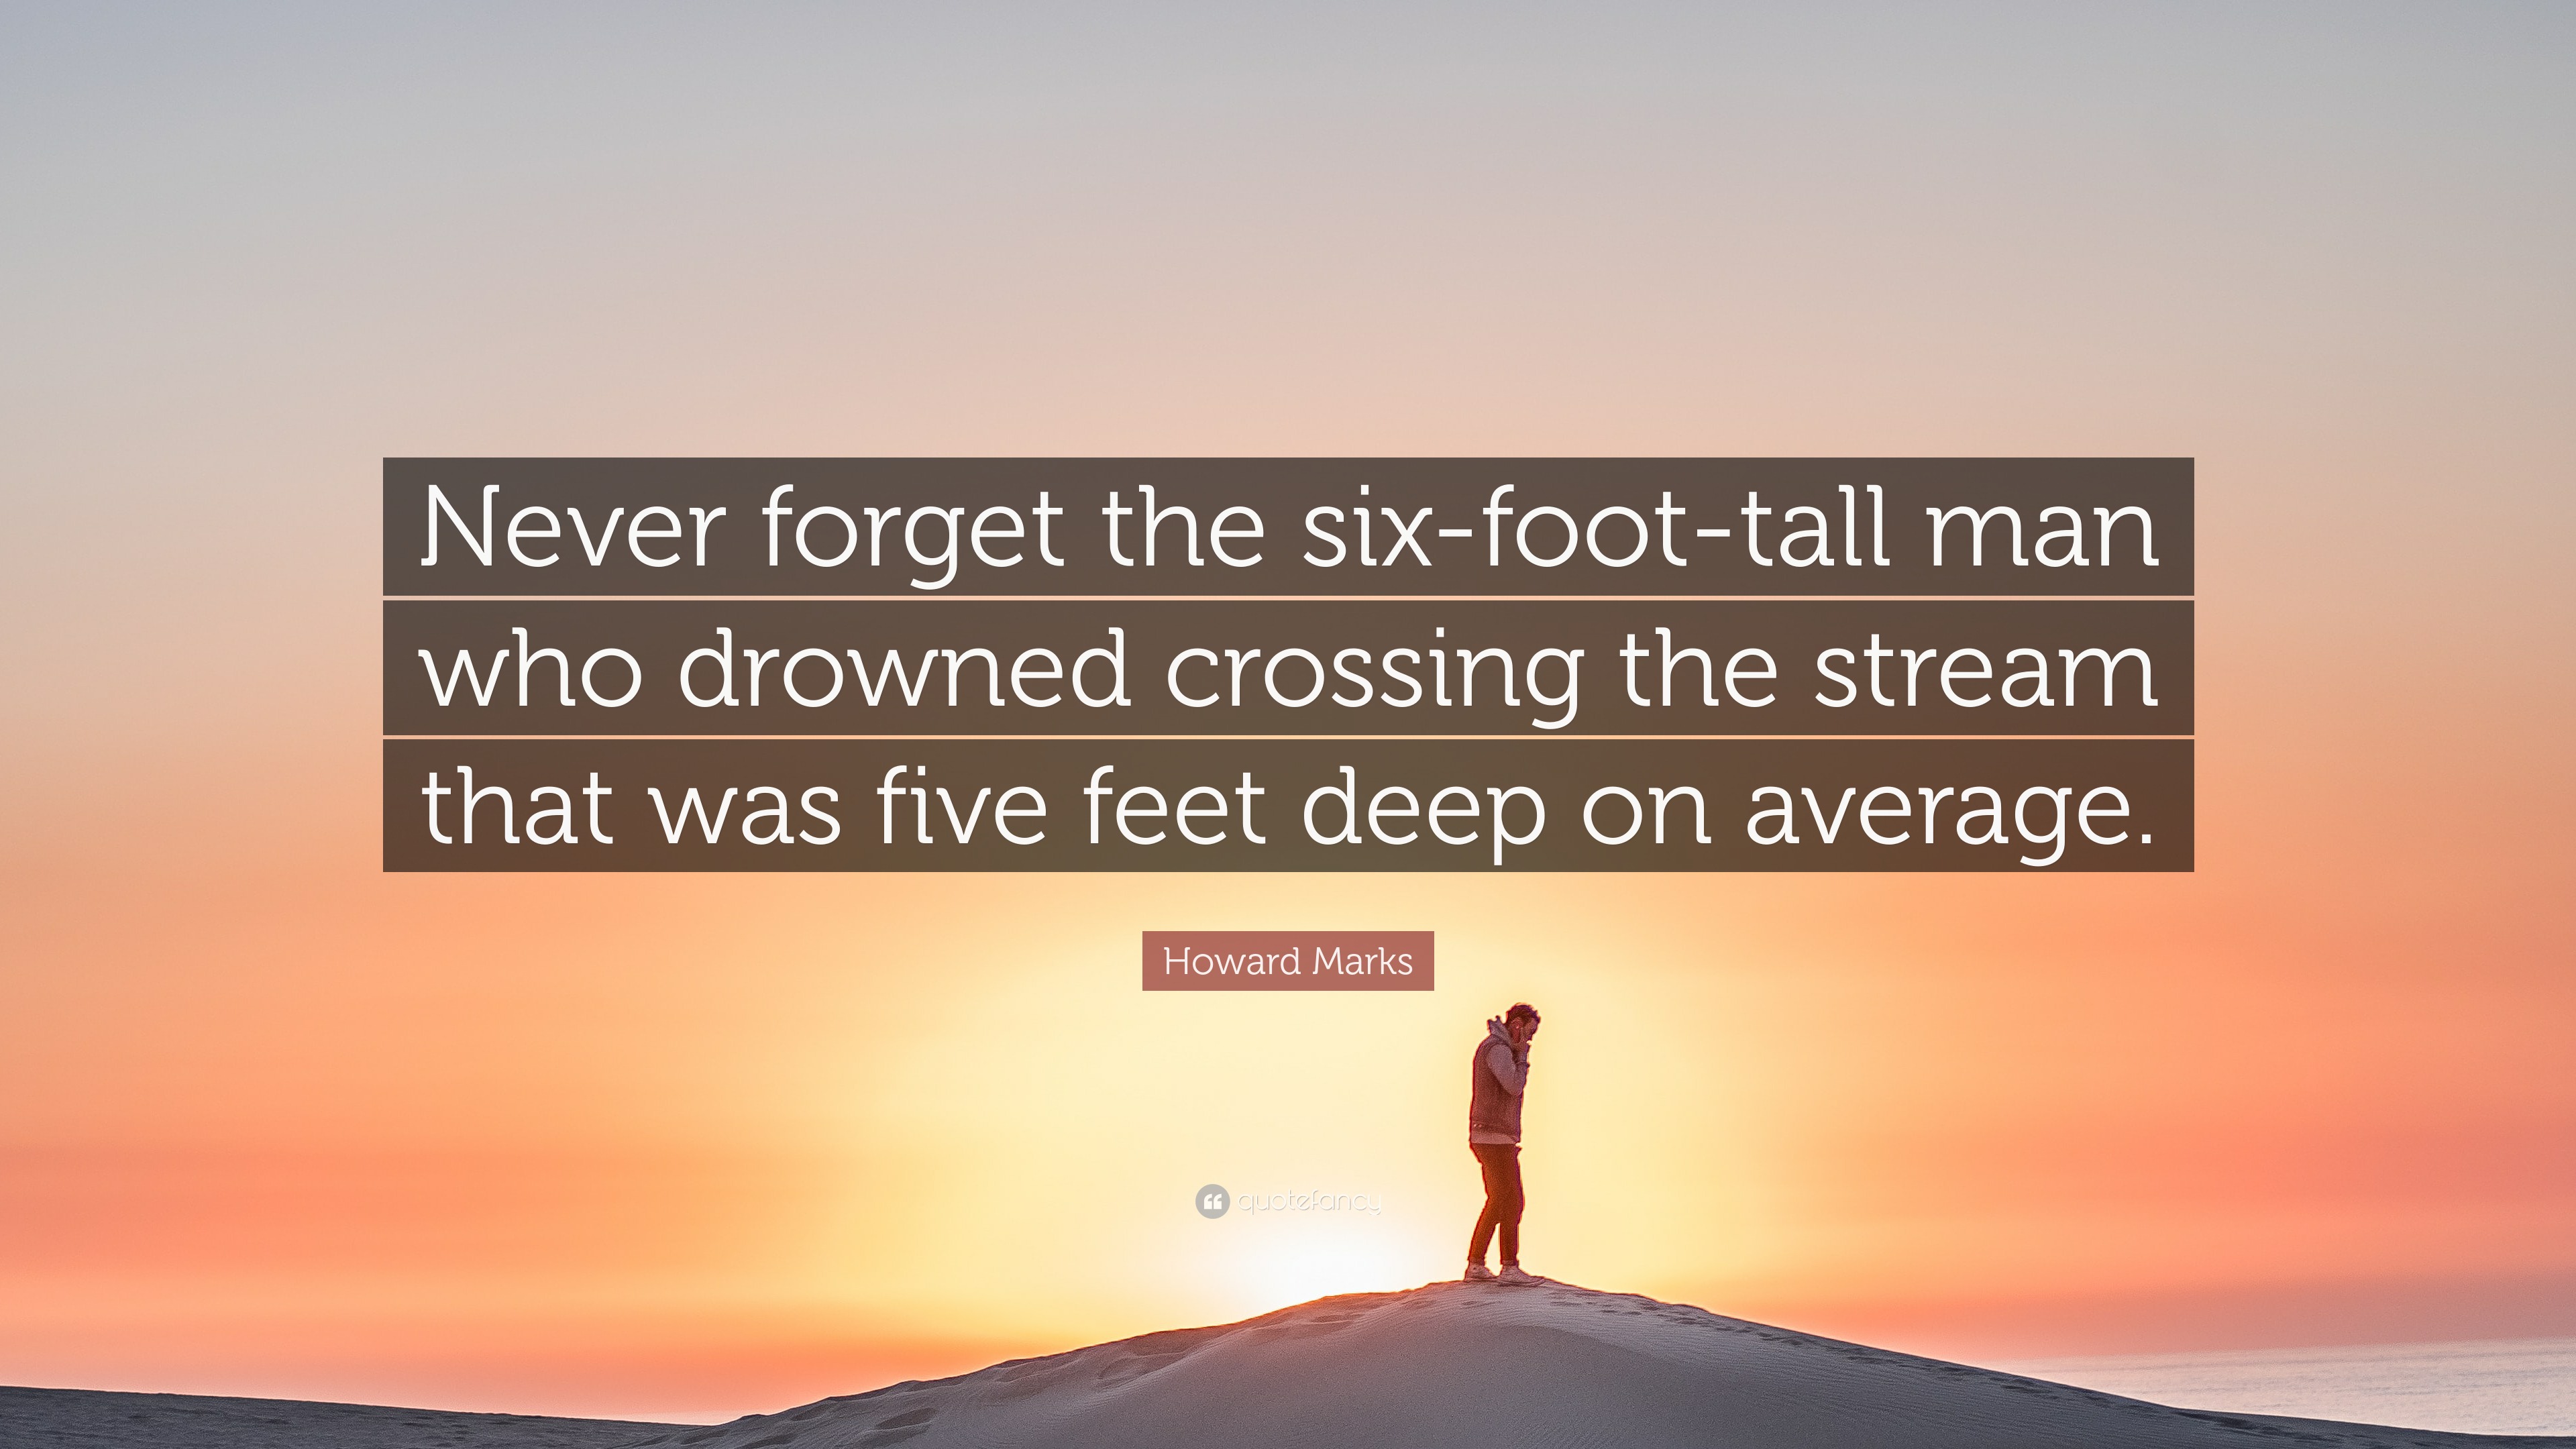 Howard Marks Quote: “Never forget the six-foot-tall man who